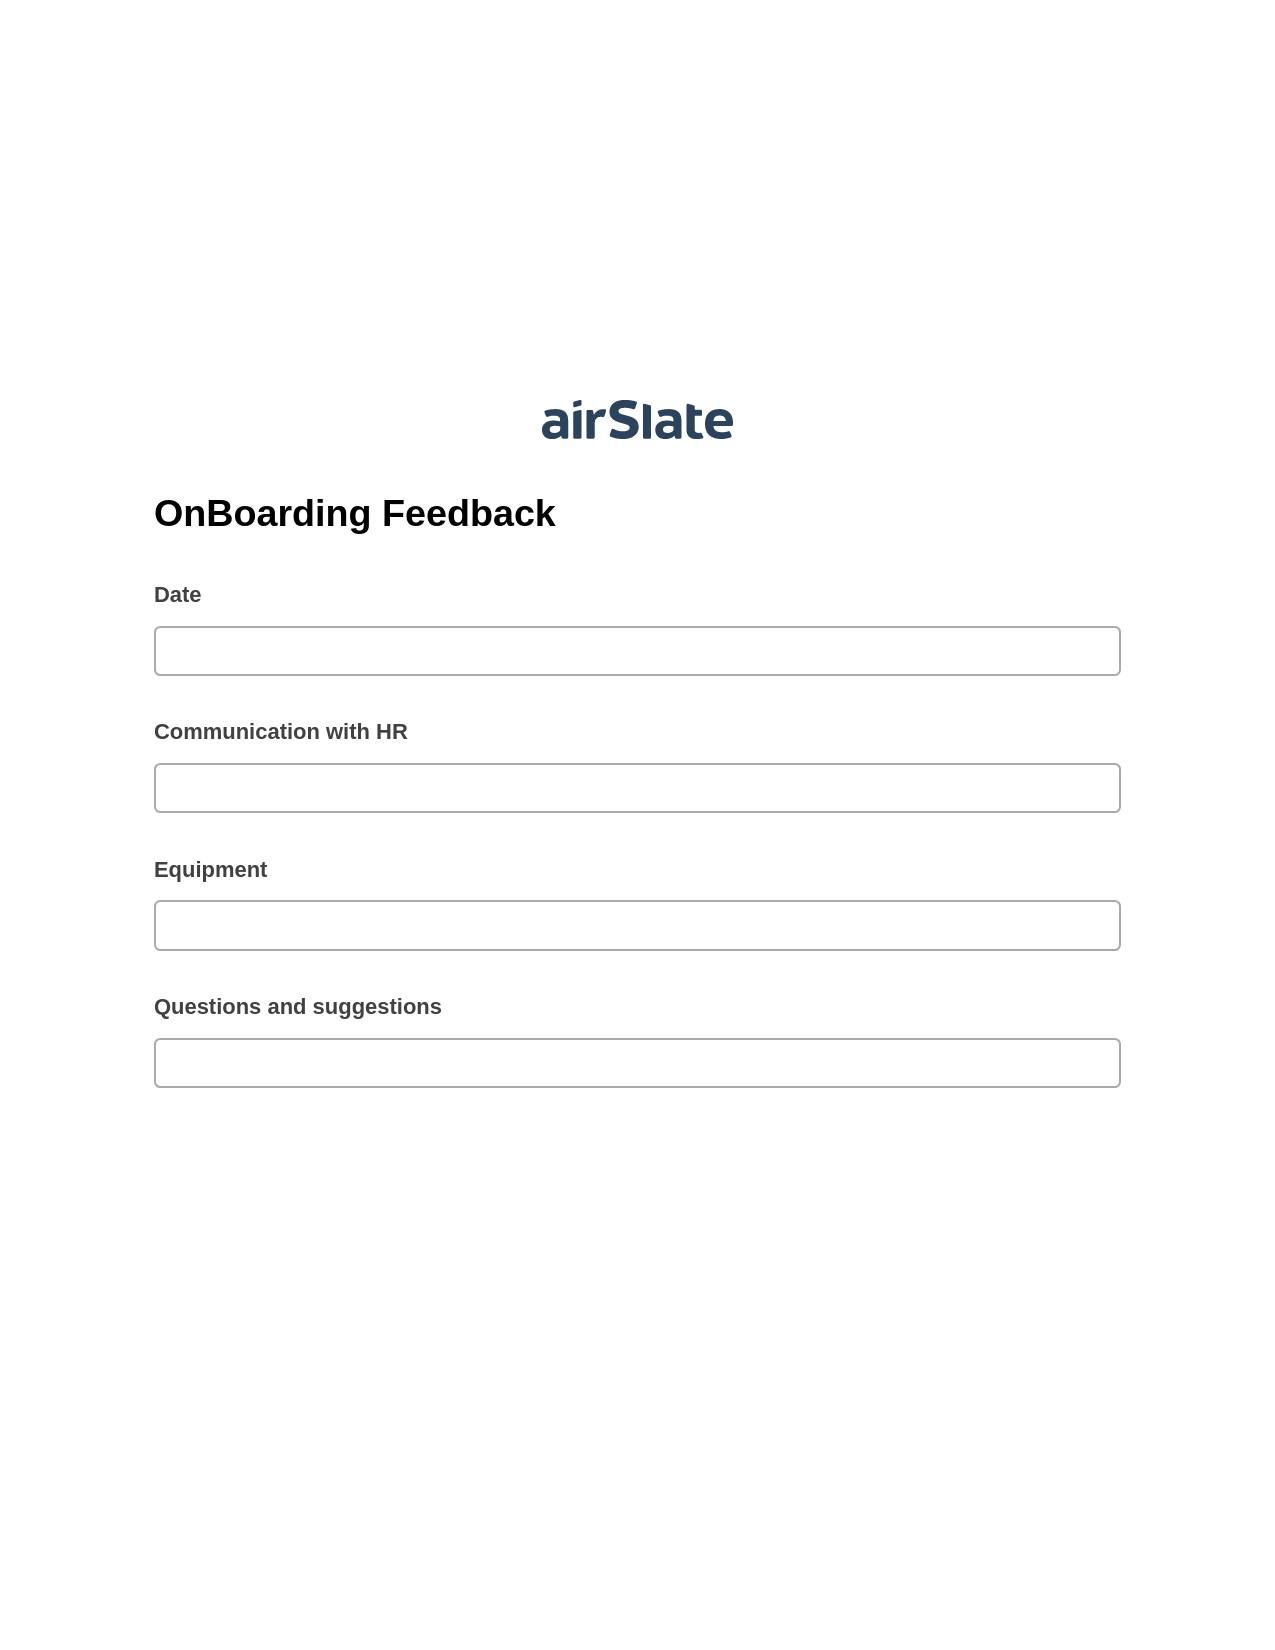 OnBoarding Feedback Pre-fill from Salesforce Record Bot, Document Hide Bot, Export to Excel 365 Bot